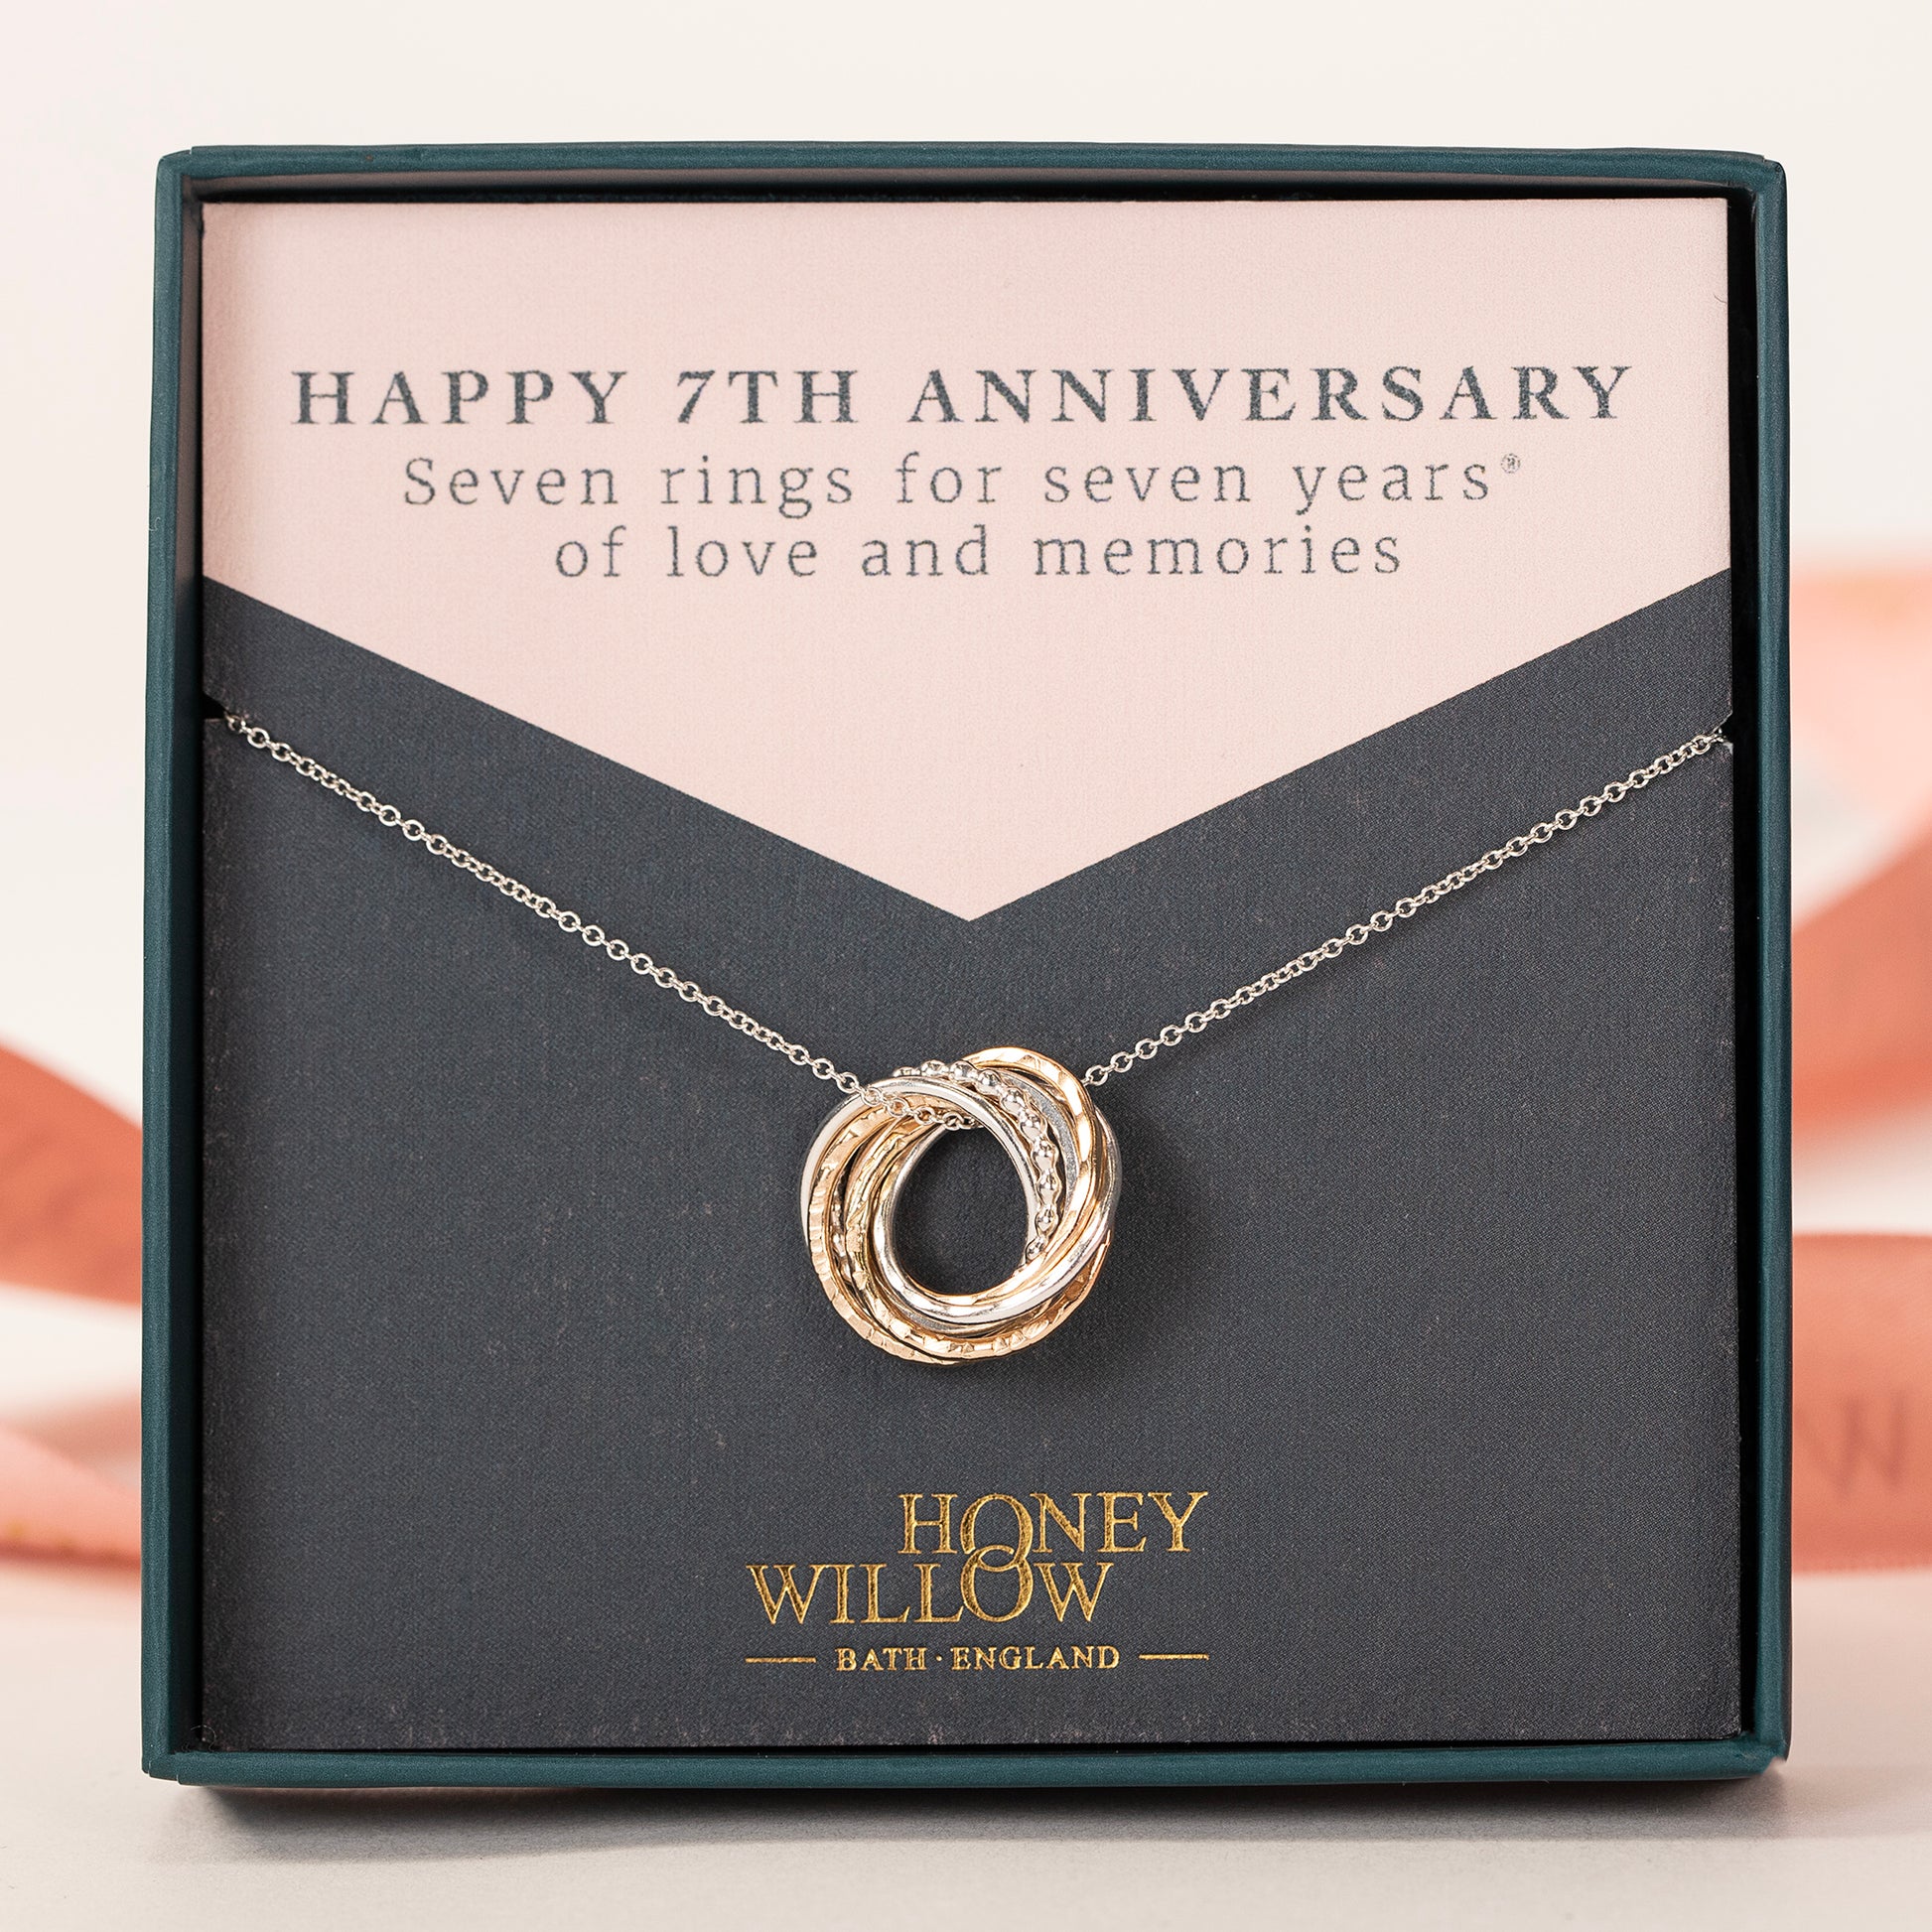 7th anniversary necklace